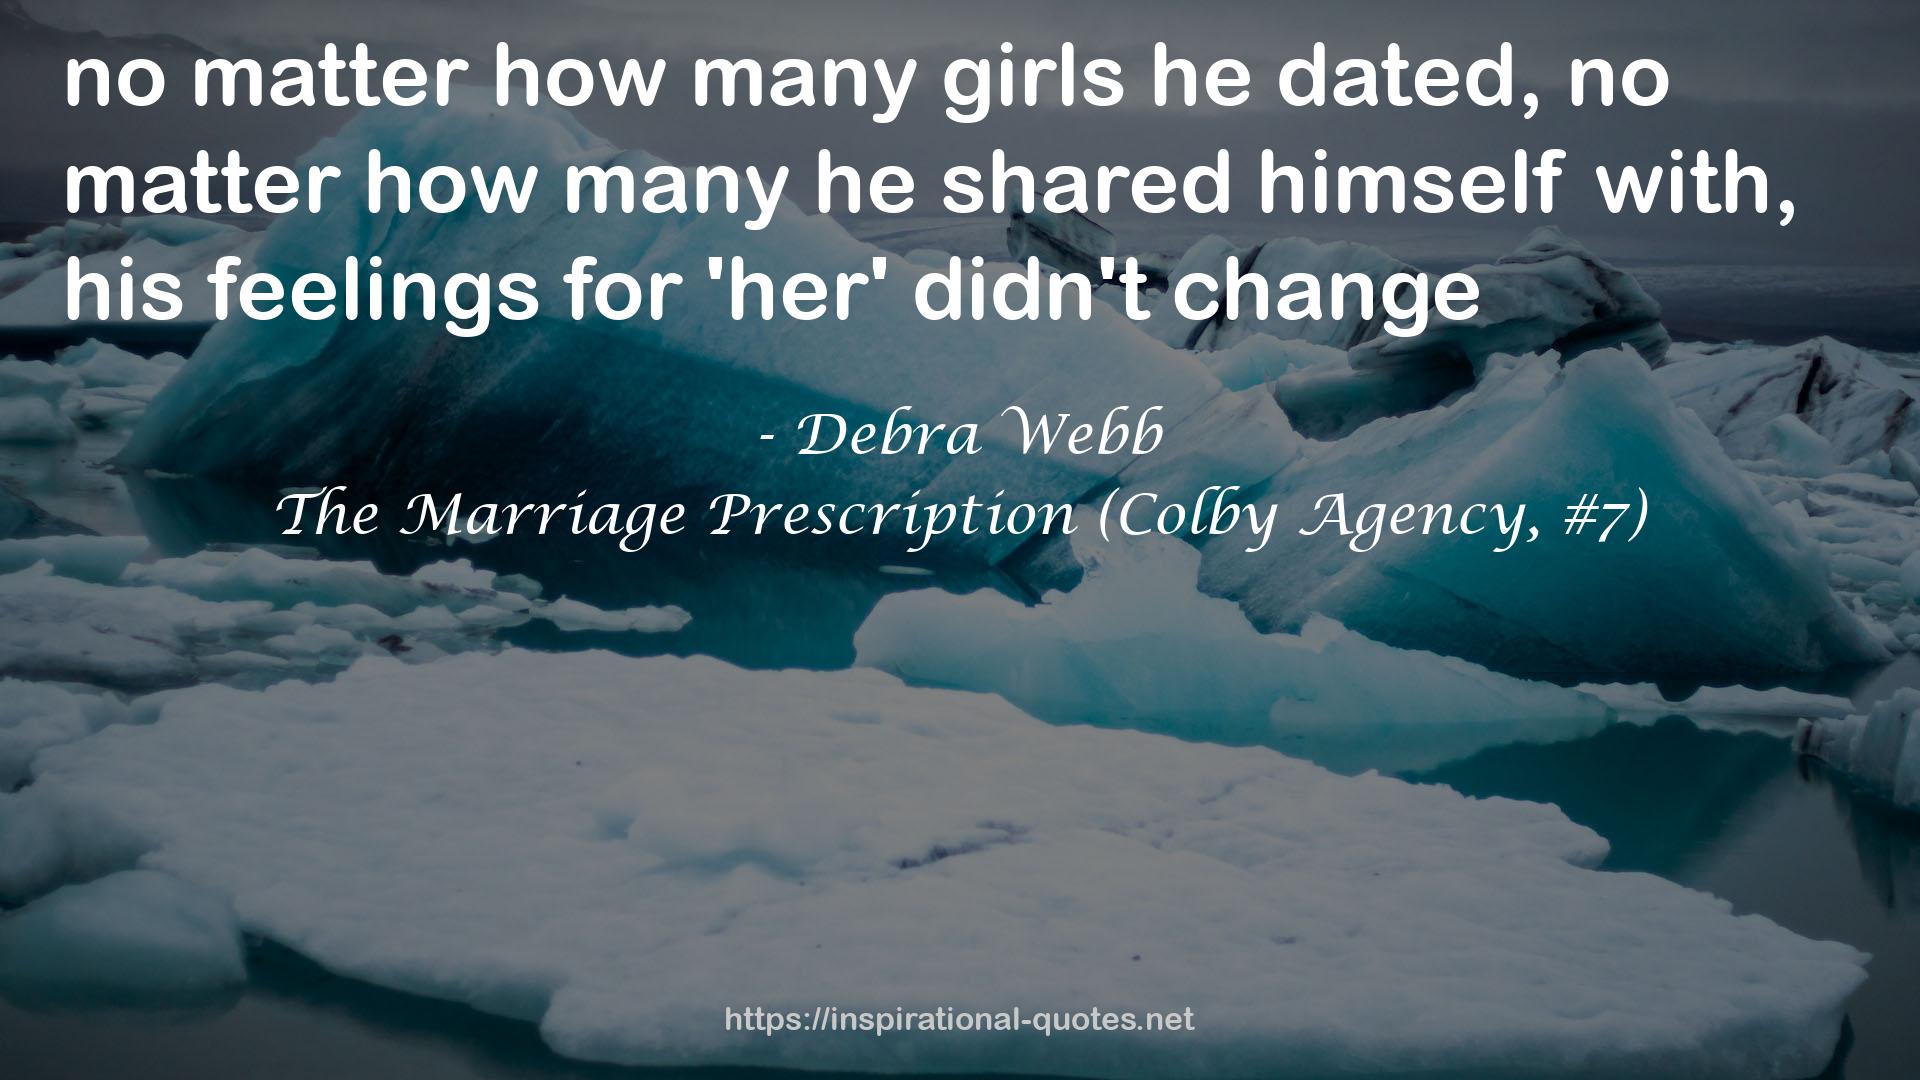 The Marriage Prescription (Colby Agency, #7) QUOTES